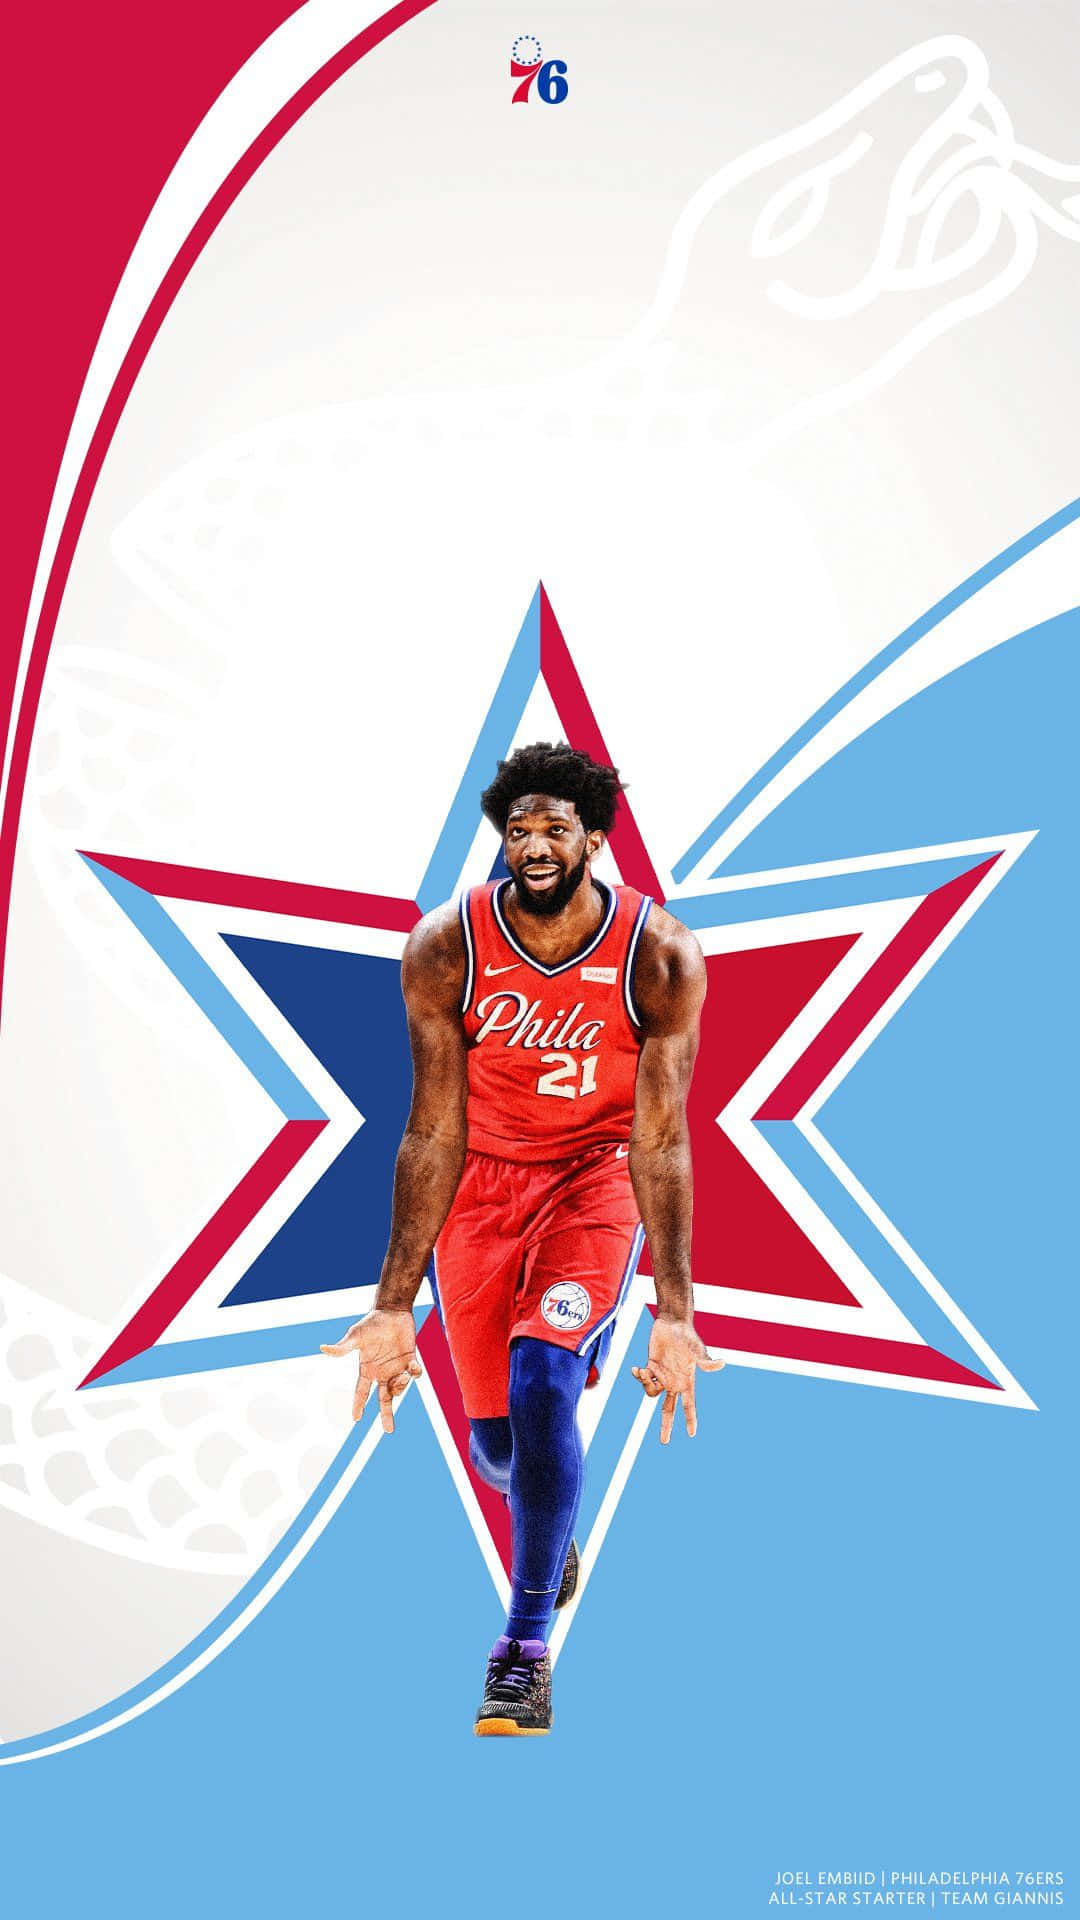 Represent your favorite NBA team with this stylish Sixers Iphone Wallpaper Wallpaper